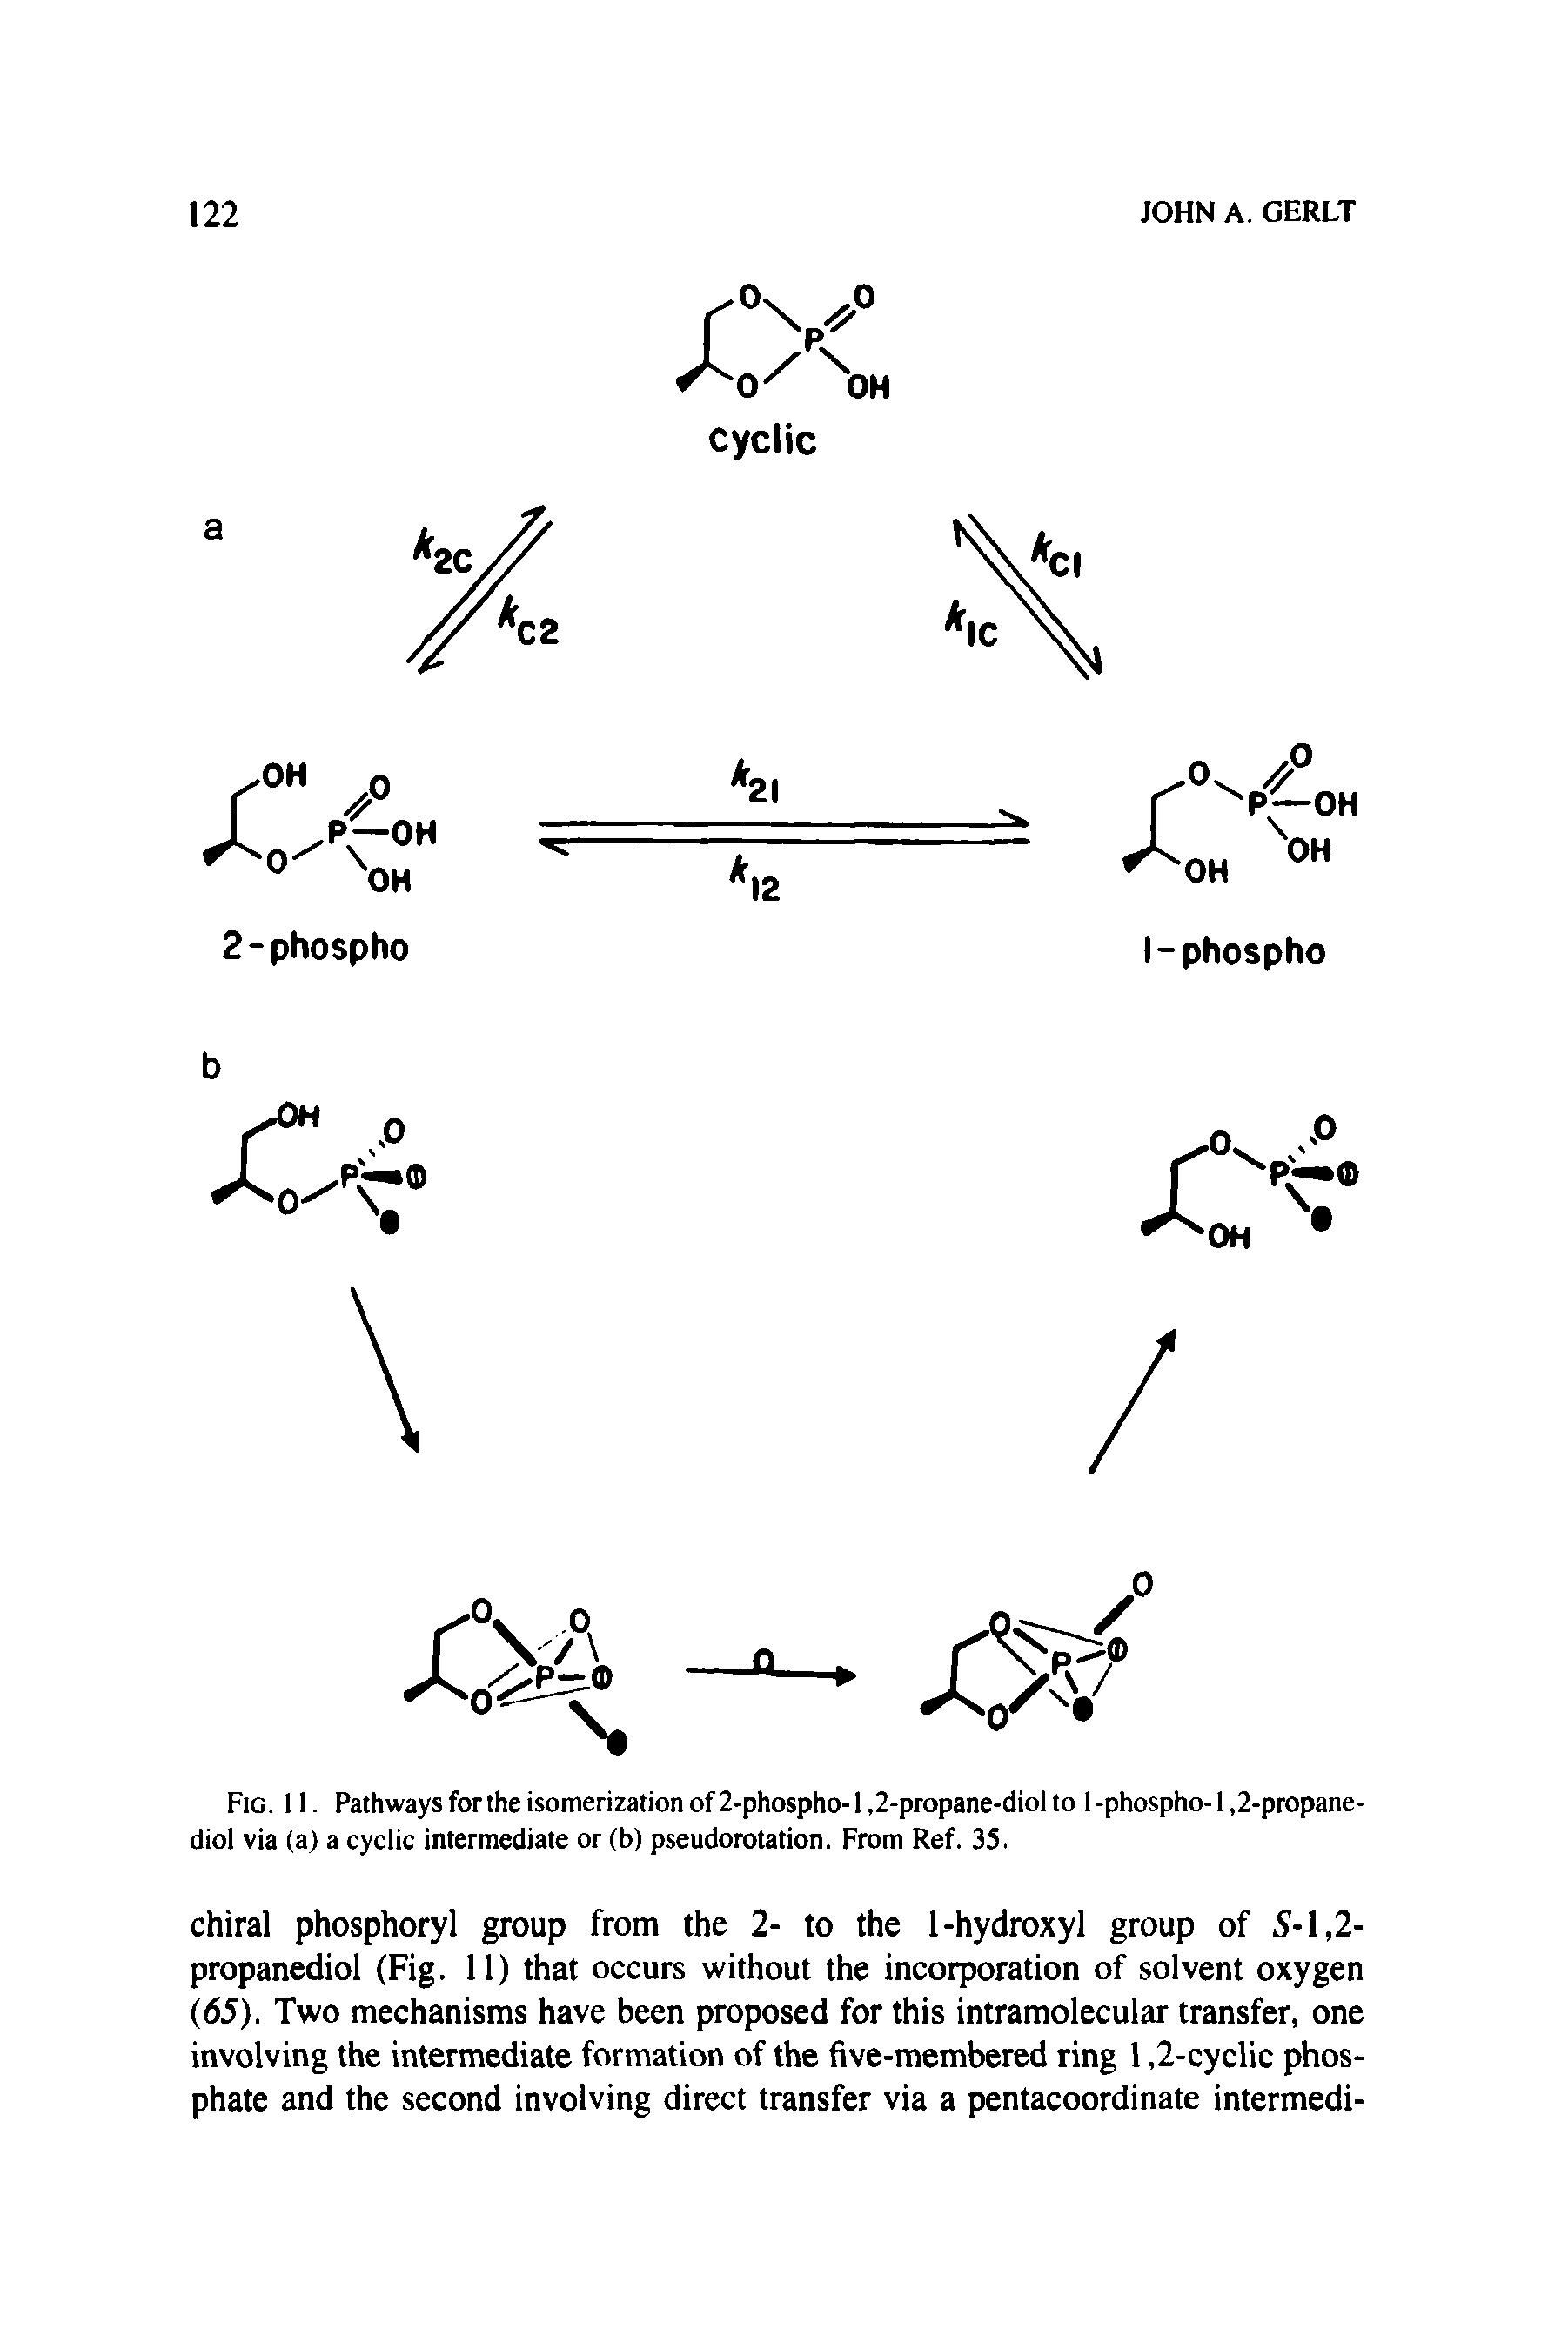 Fig. 11. Pathways for the isomerization of 2-phospho-1,2-propane-diol to I -phospho-1,2-propanediol via (a) a cyclic intermediate or (b) pseudorotation. From Ref. 35.